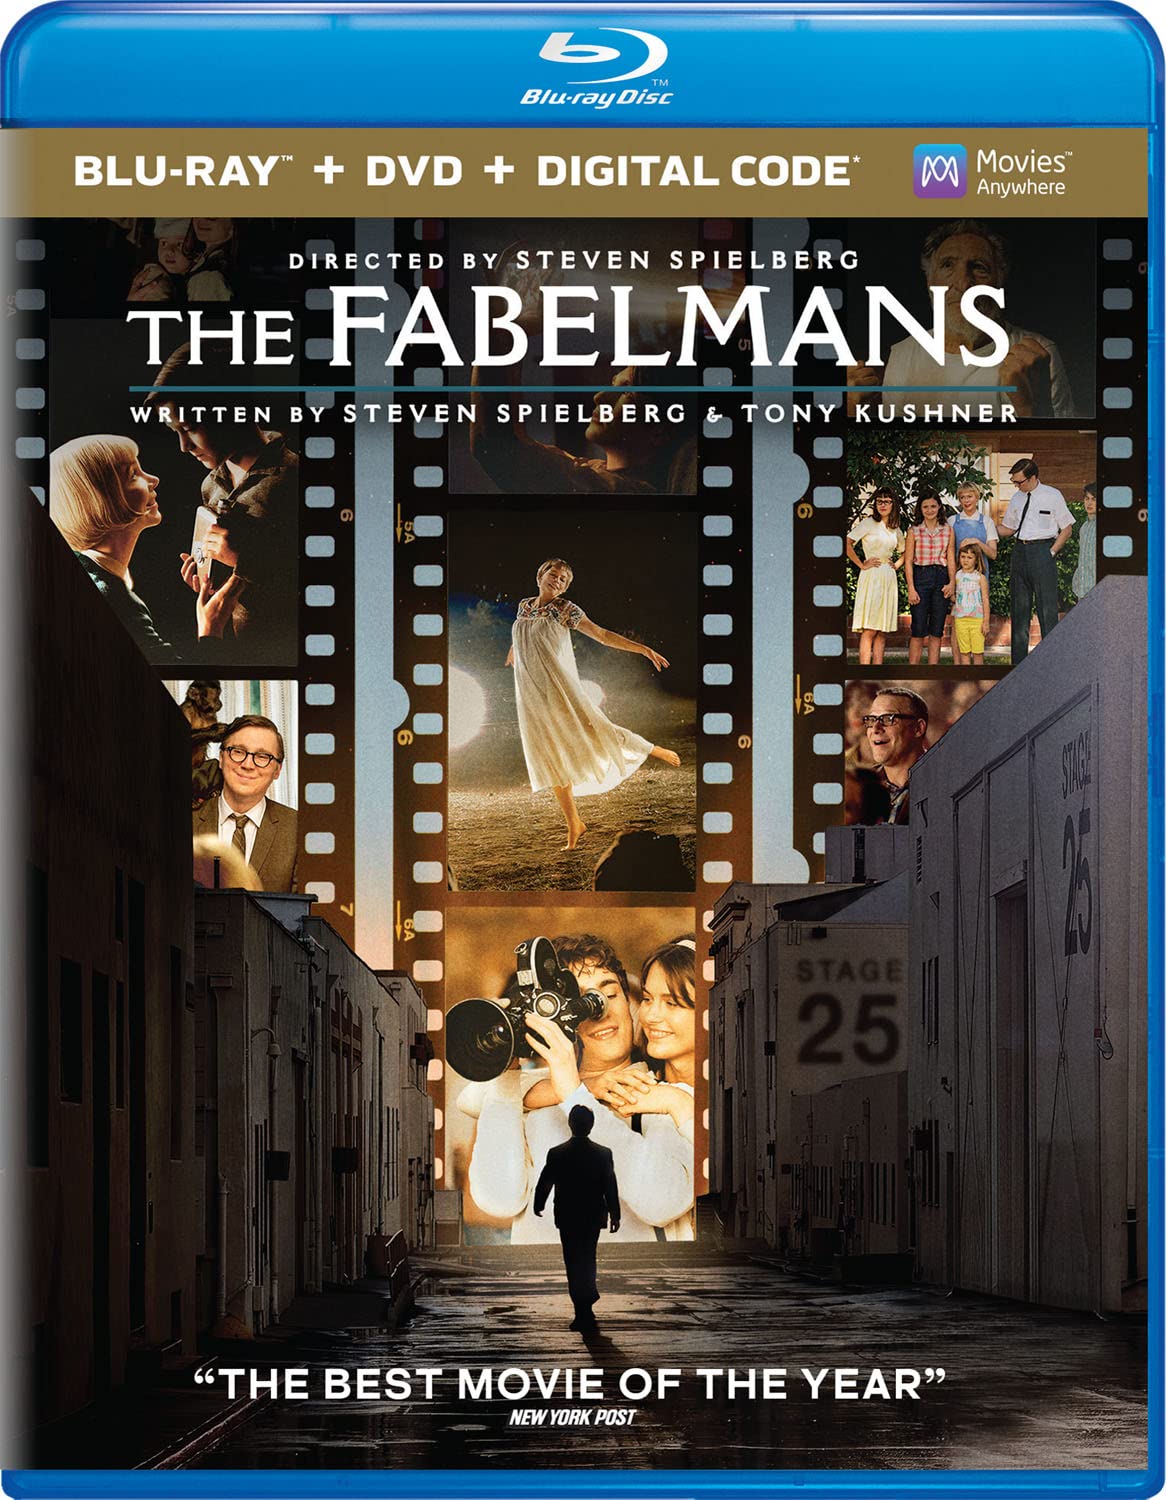 The Fabelmans HD Digital Code (Movies Anywhere)